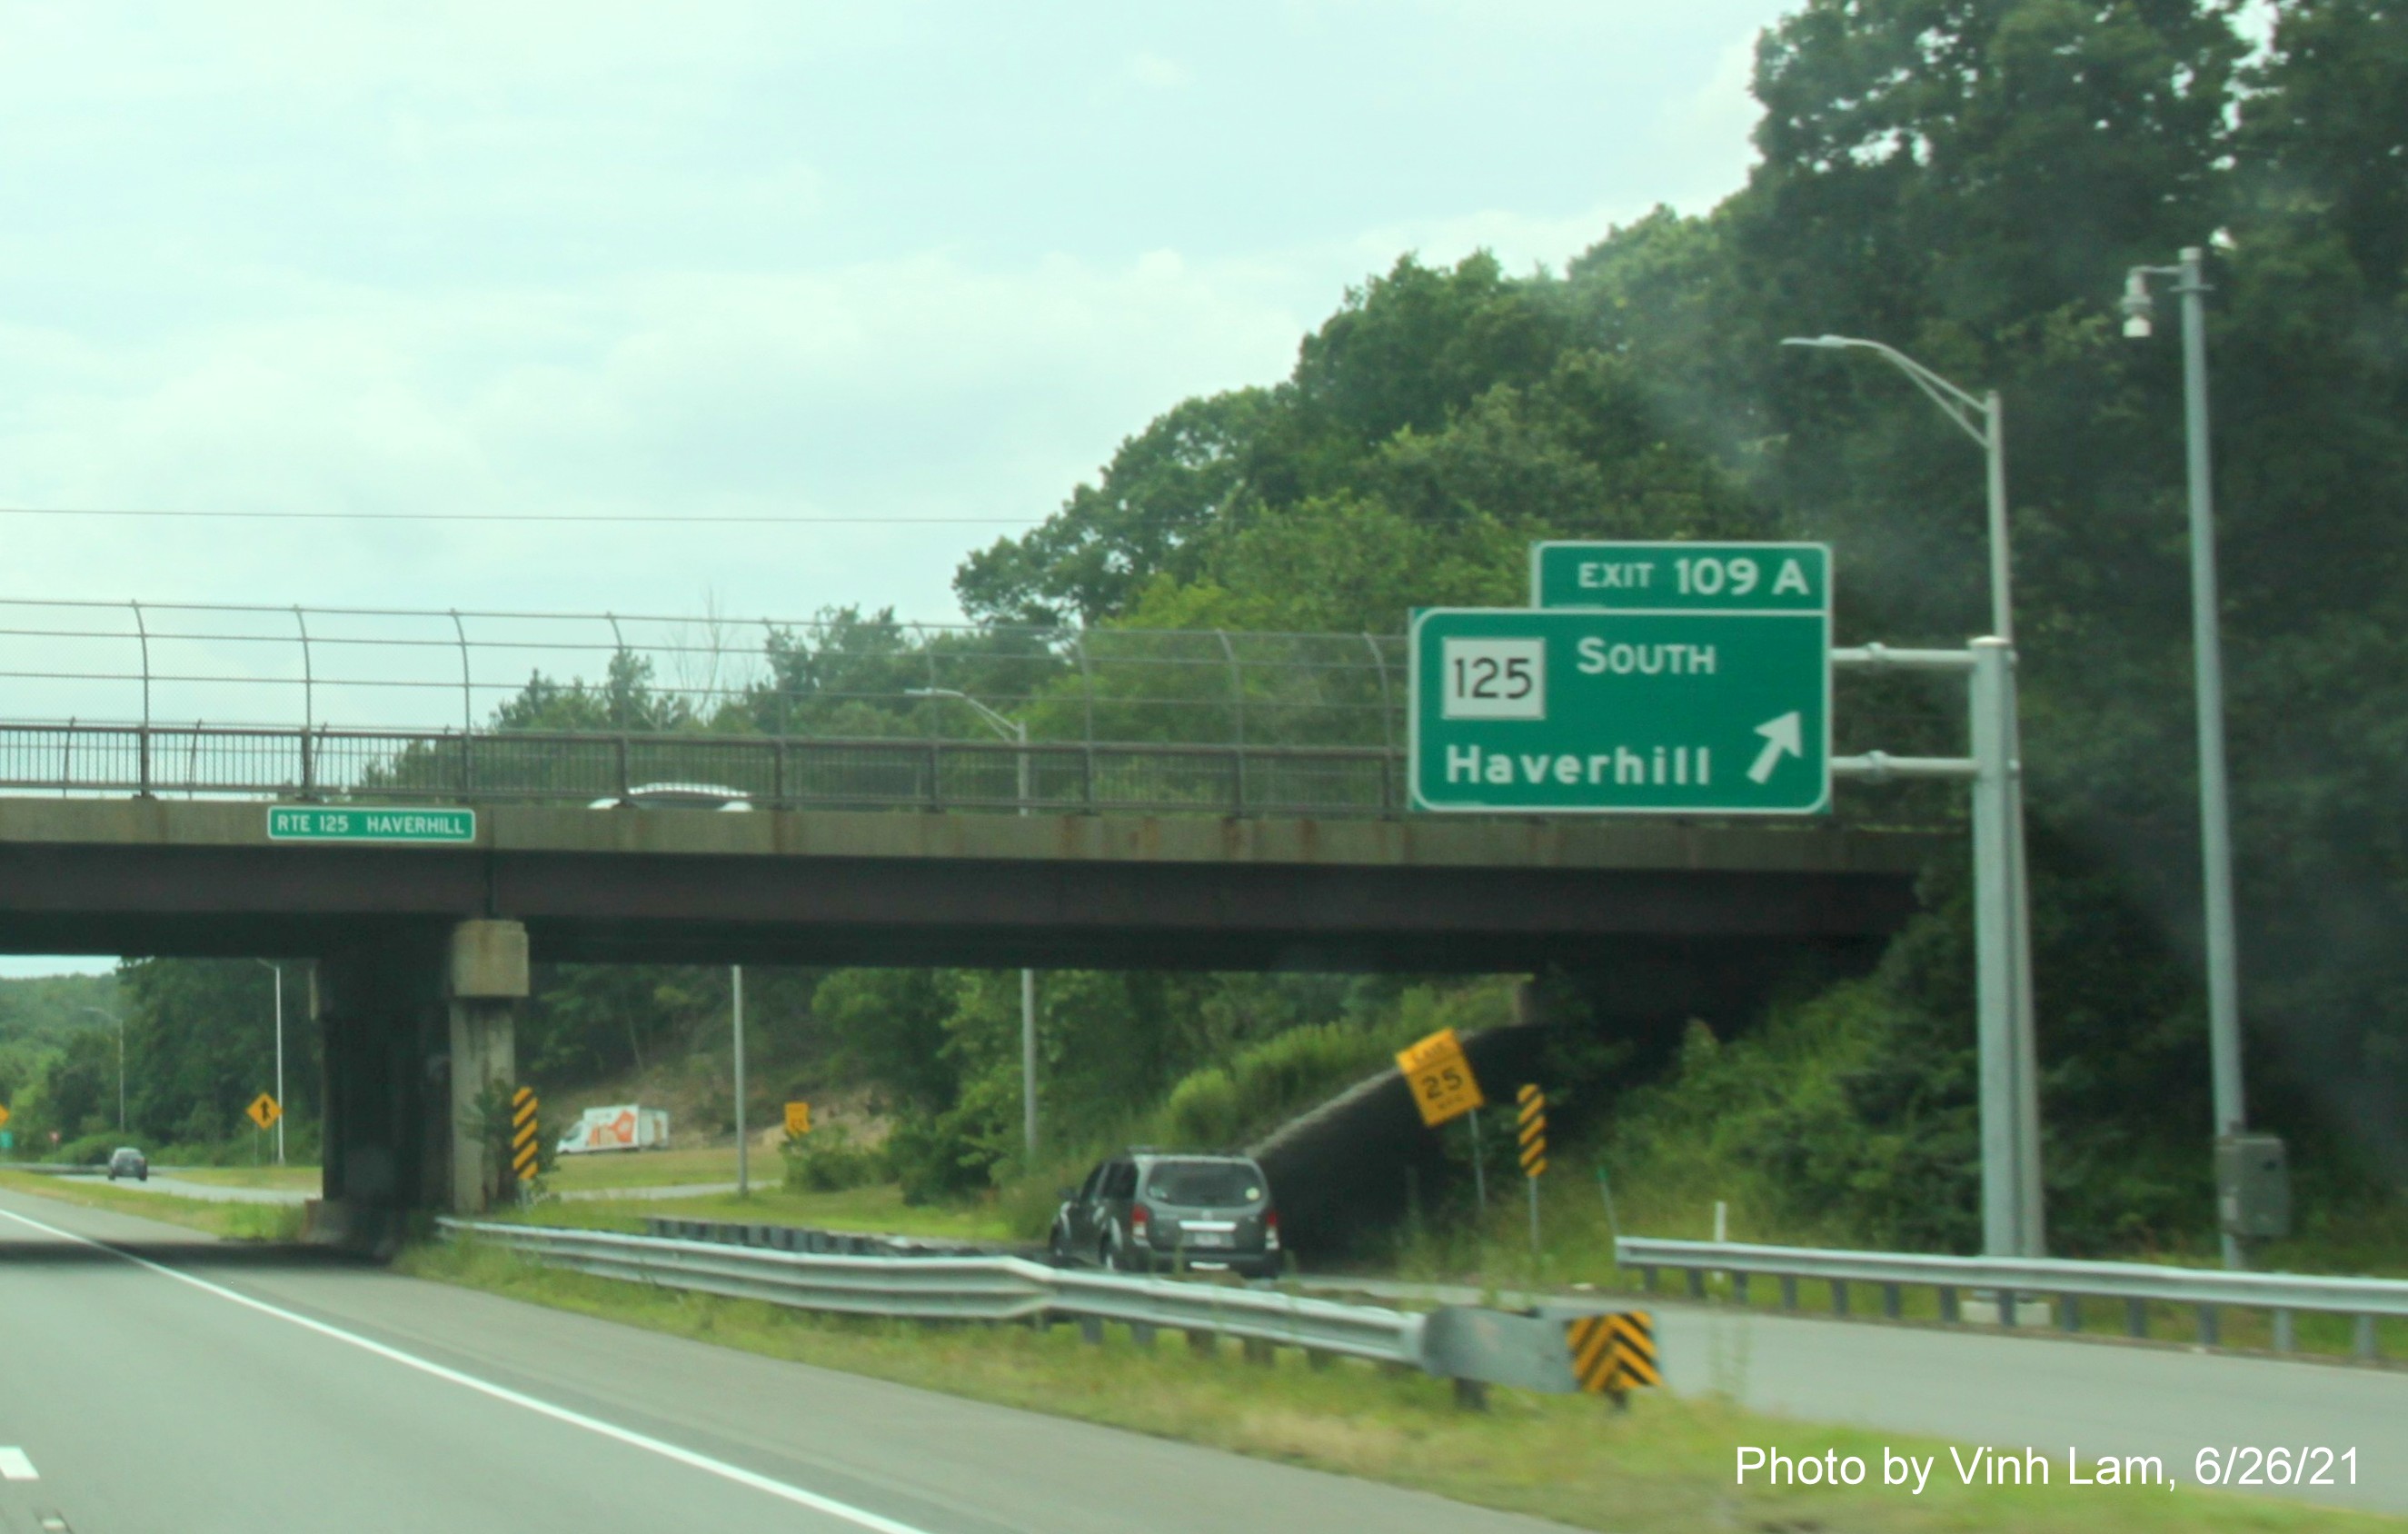 Image of overhead ramp sign on C/D lanes for MA 125 South exit with new milepost based exit number seen from I-495 South in Haverhill, photo by Vinh Lam, June 2021